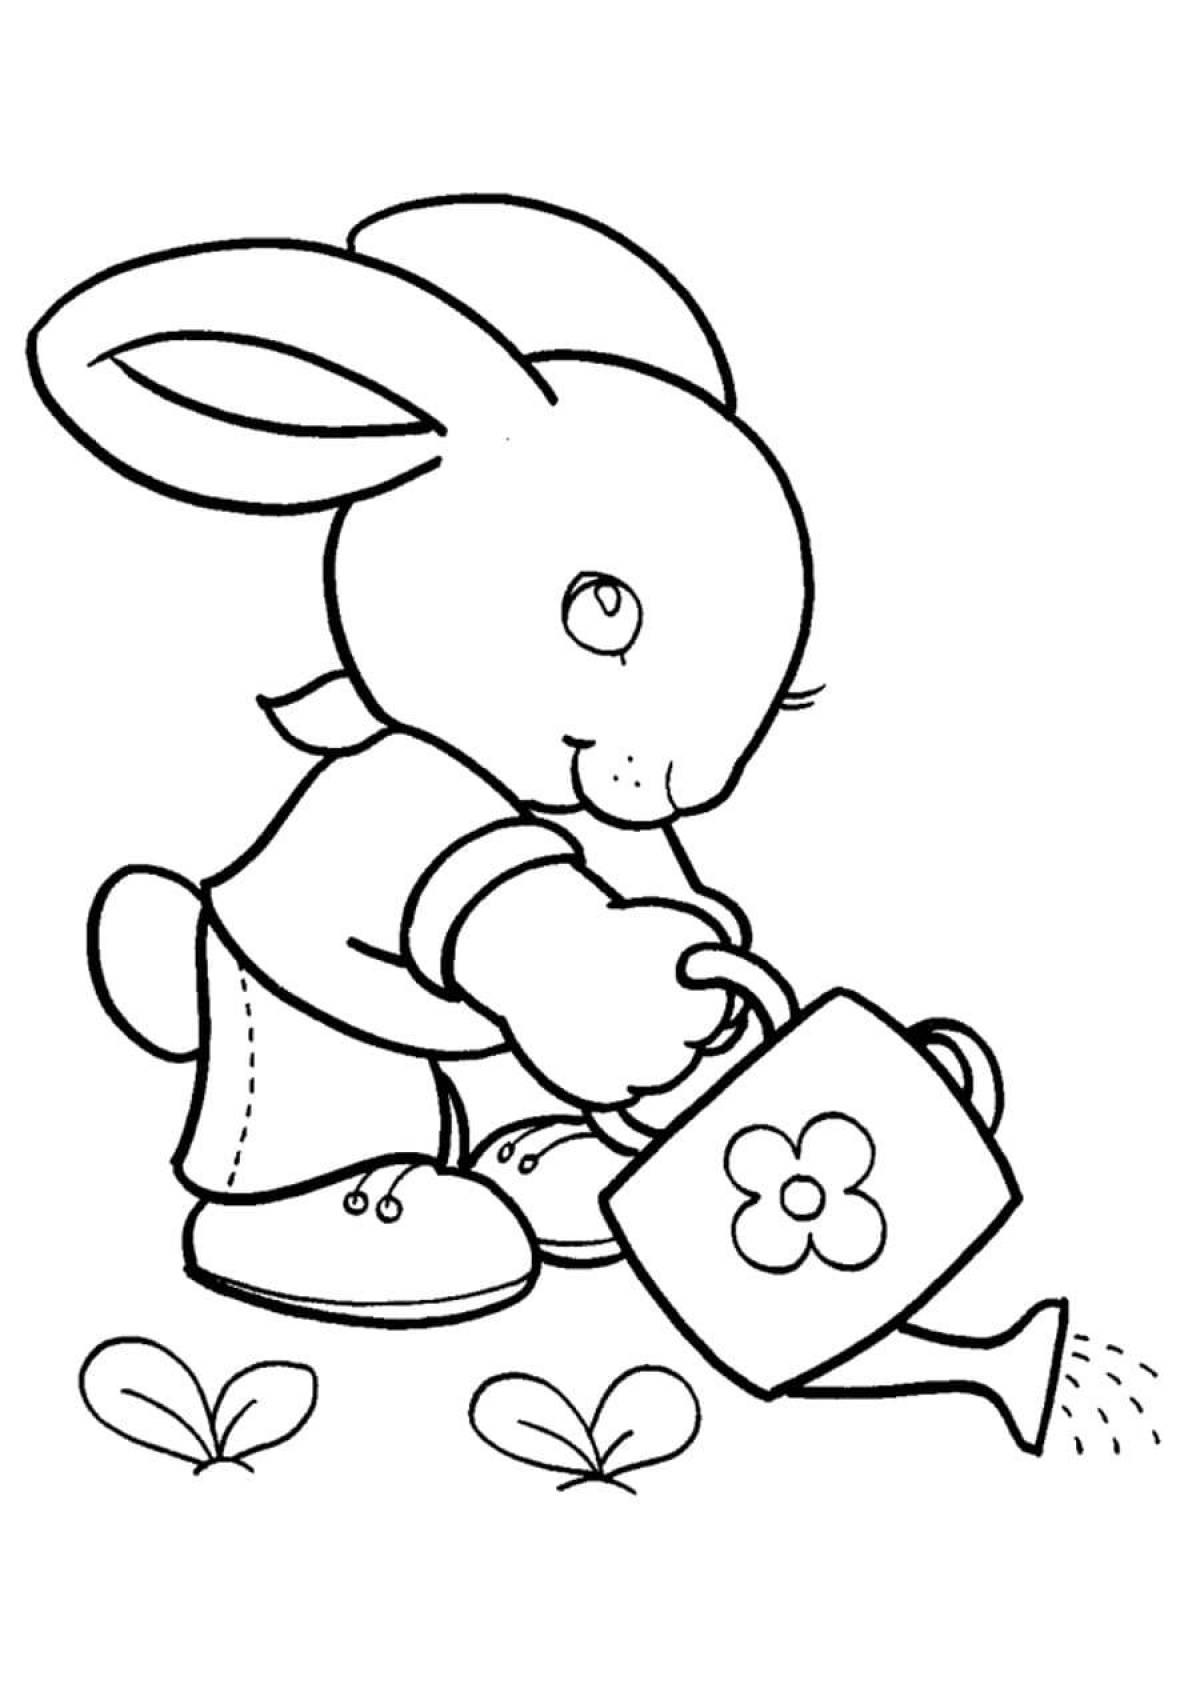 Radiant coloring page bunny game